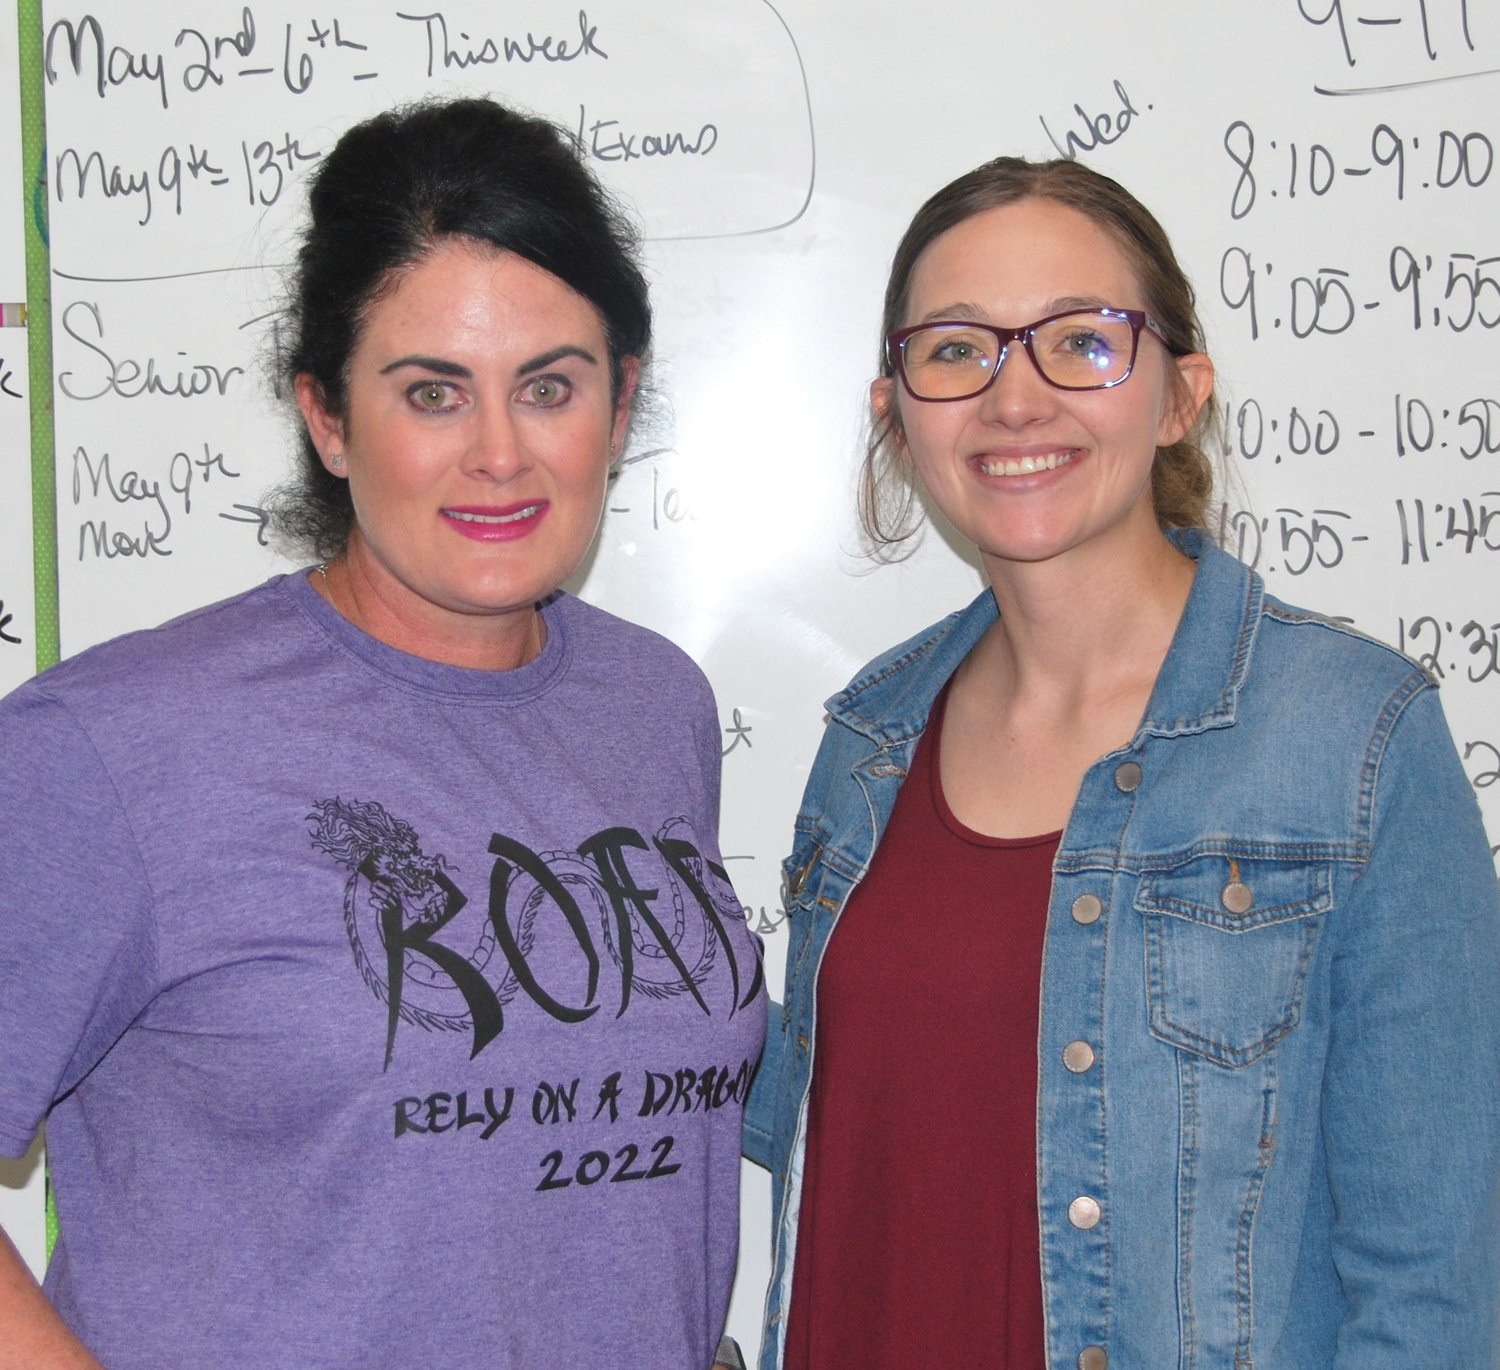 Mindy Wells (left) and Zoe Swift have teamed up to teach an “adulting” real-life skills class this year. The elective class is so popular they are expanding it to two sections next year.